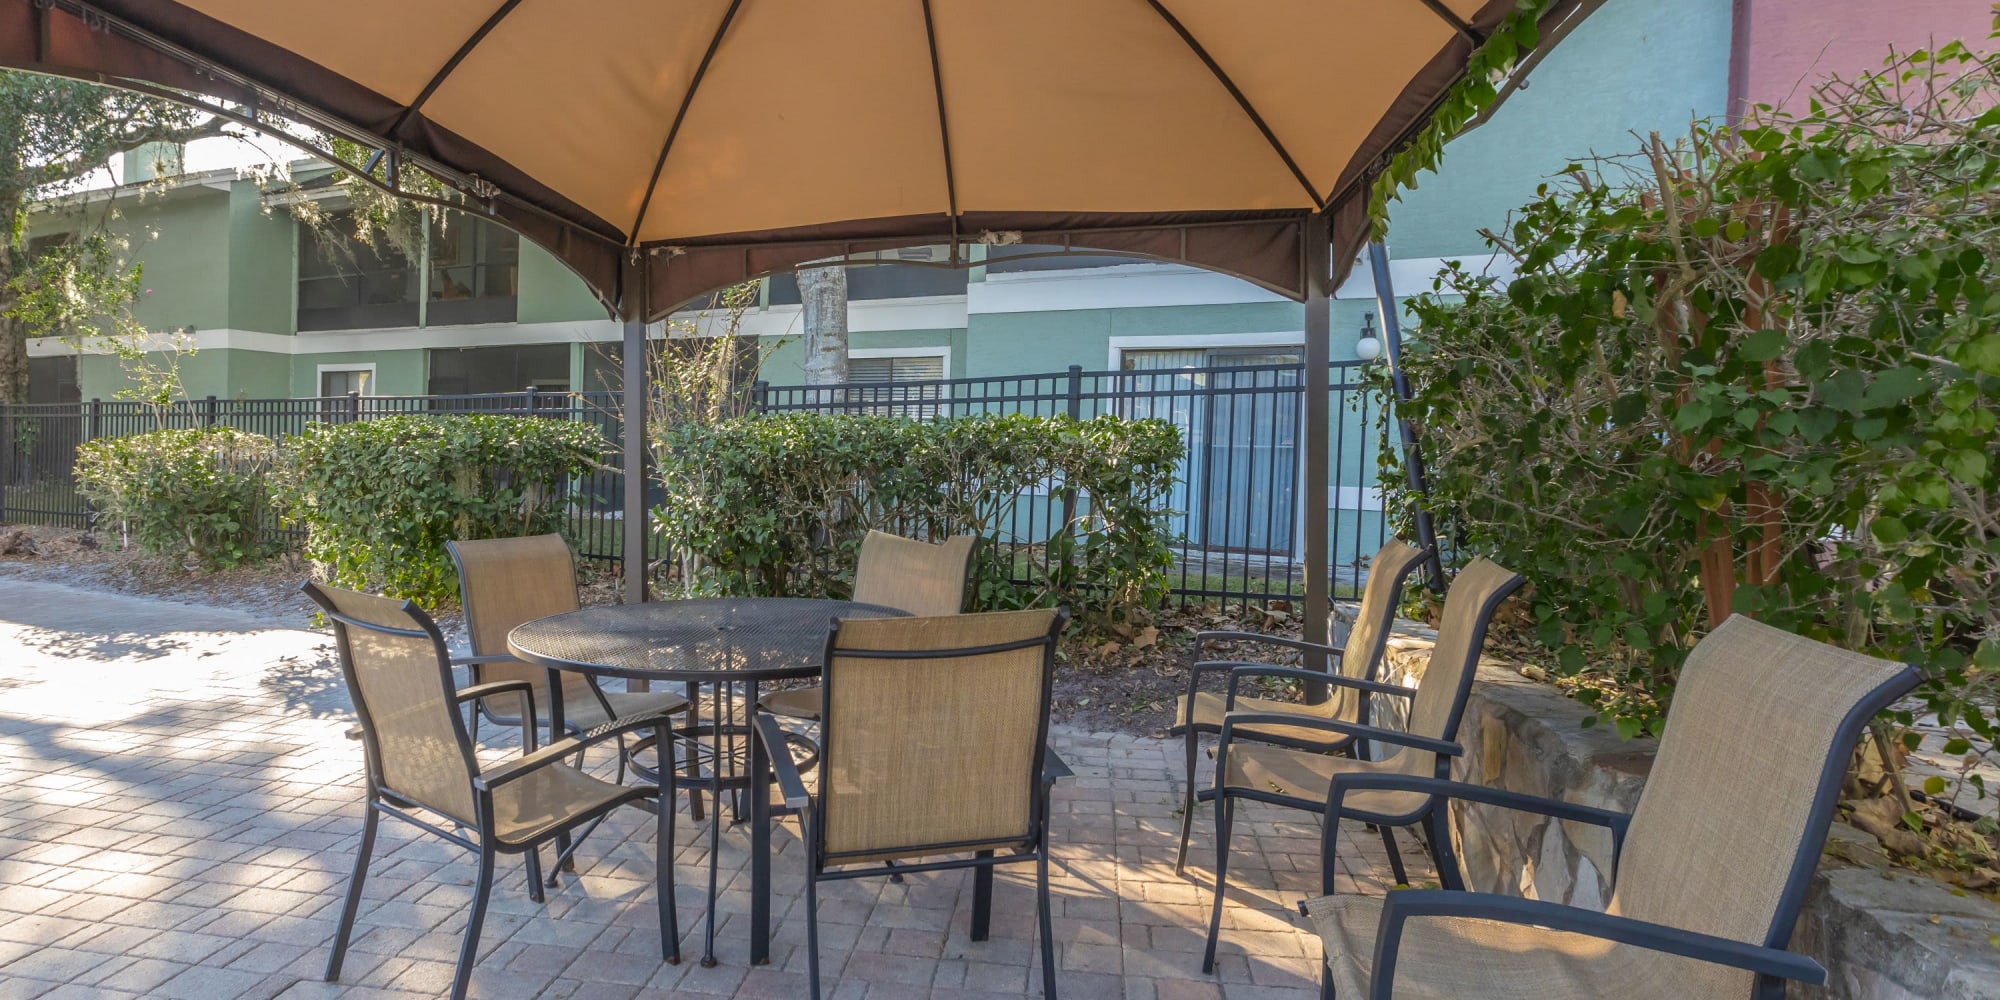 Picnic area by the pool at Stone Creek at Wekiva in Altamonte Springs, Florida